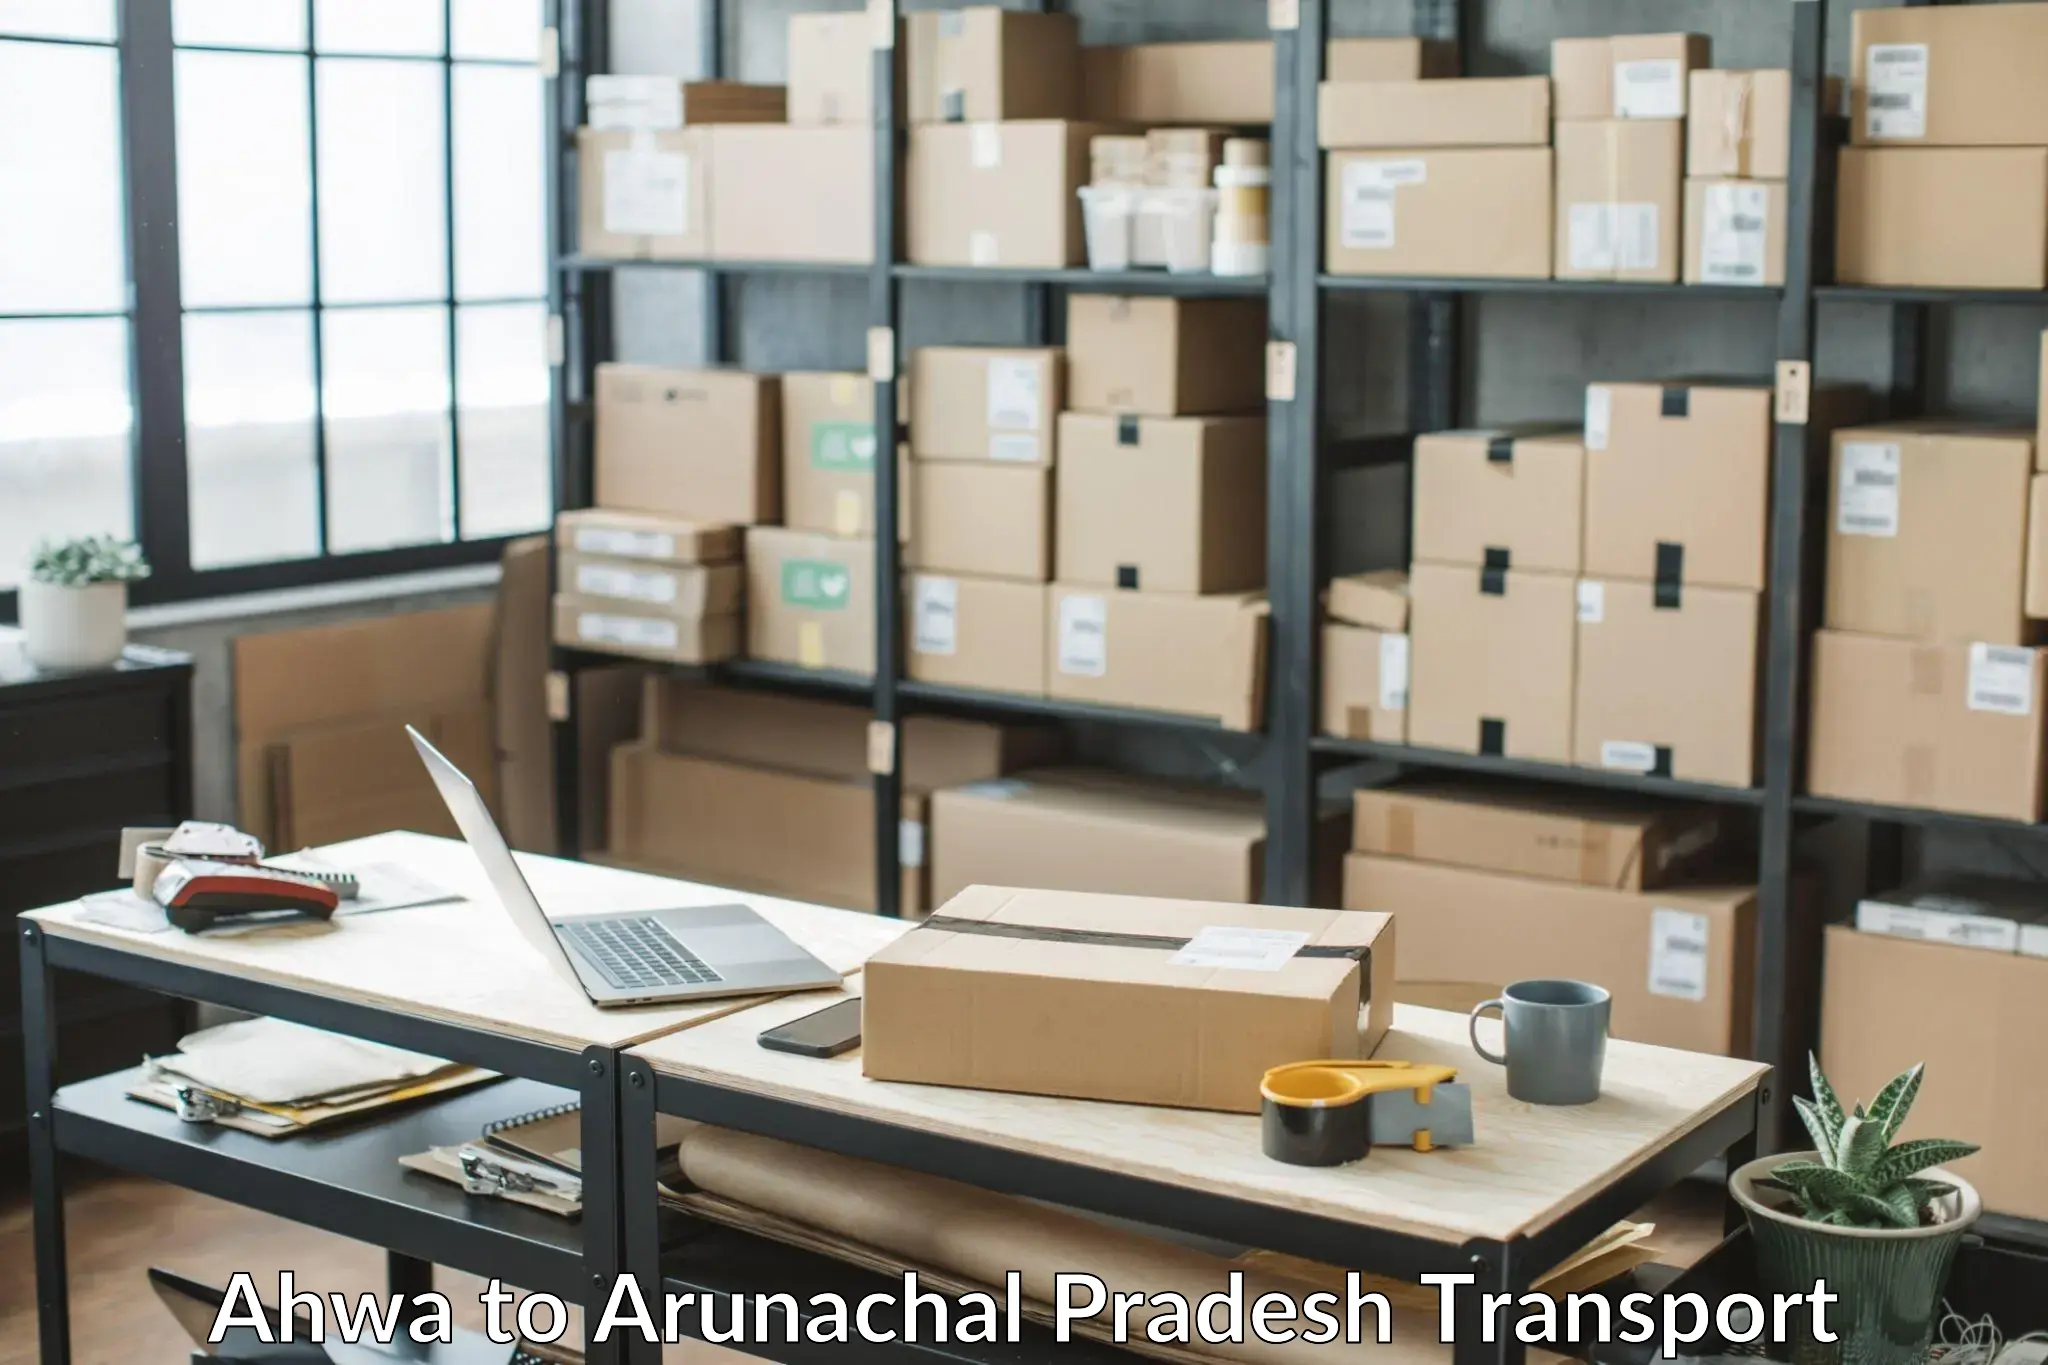 Truck transport companies in India Ahwa to Dirang